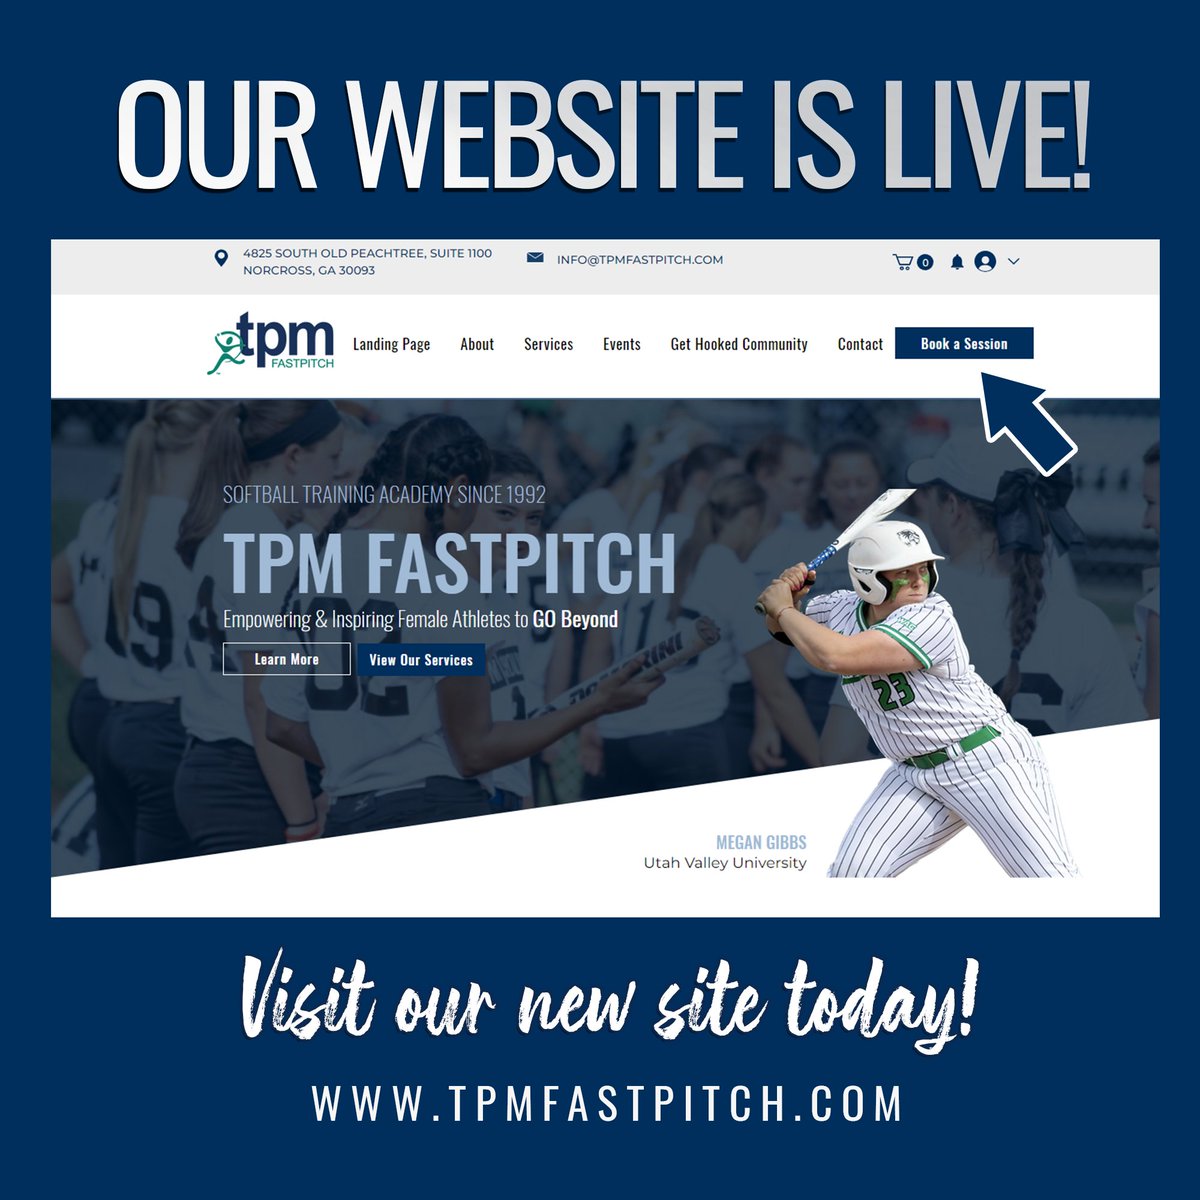 🛑 SPECIAL ANNOUNCEMENT 🛑
Our Website is Live! 🌐

Visit our new site today!
tpmfastpitch.com

#norcrossga #norcrosscommunity #softballcommunity #announcement #newwebsite #websitelaunched #visitnow #linkinbio #taponbio #newwebsitealert🚨 #shoplocal #bookasession